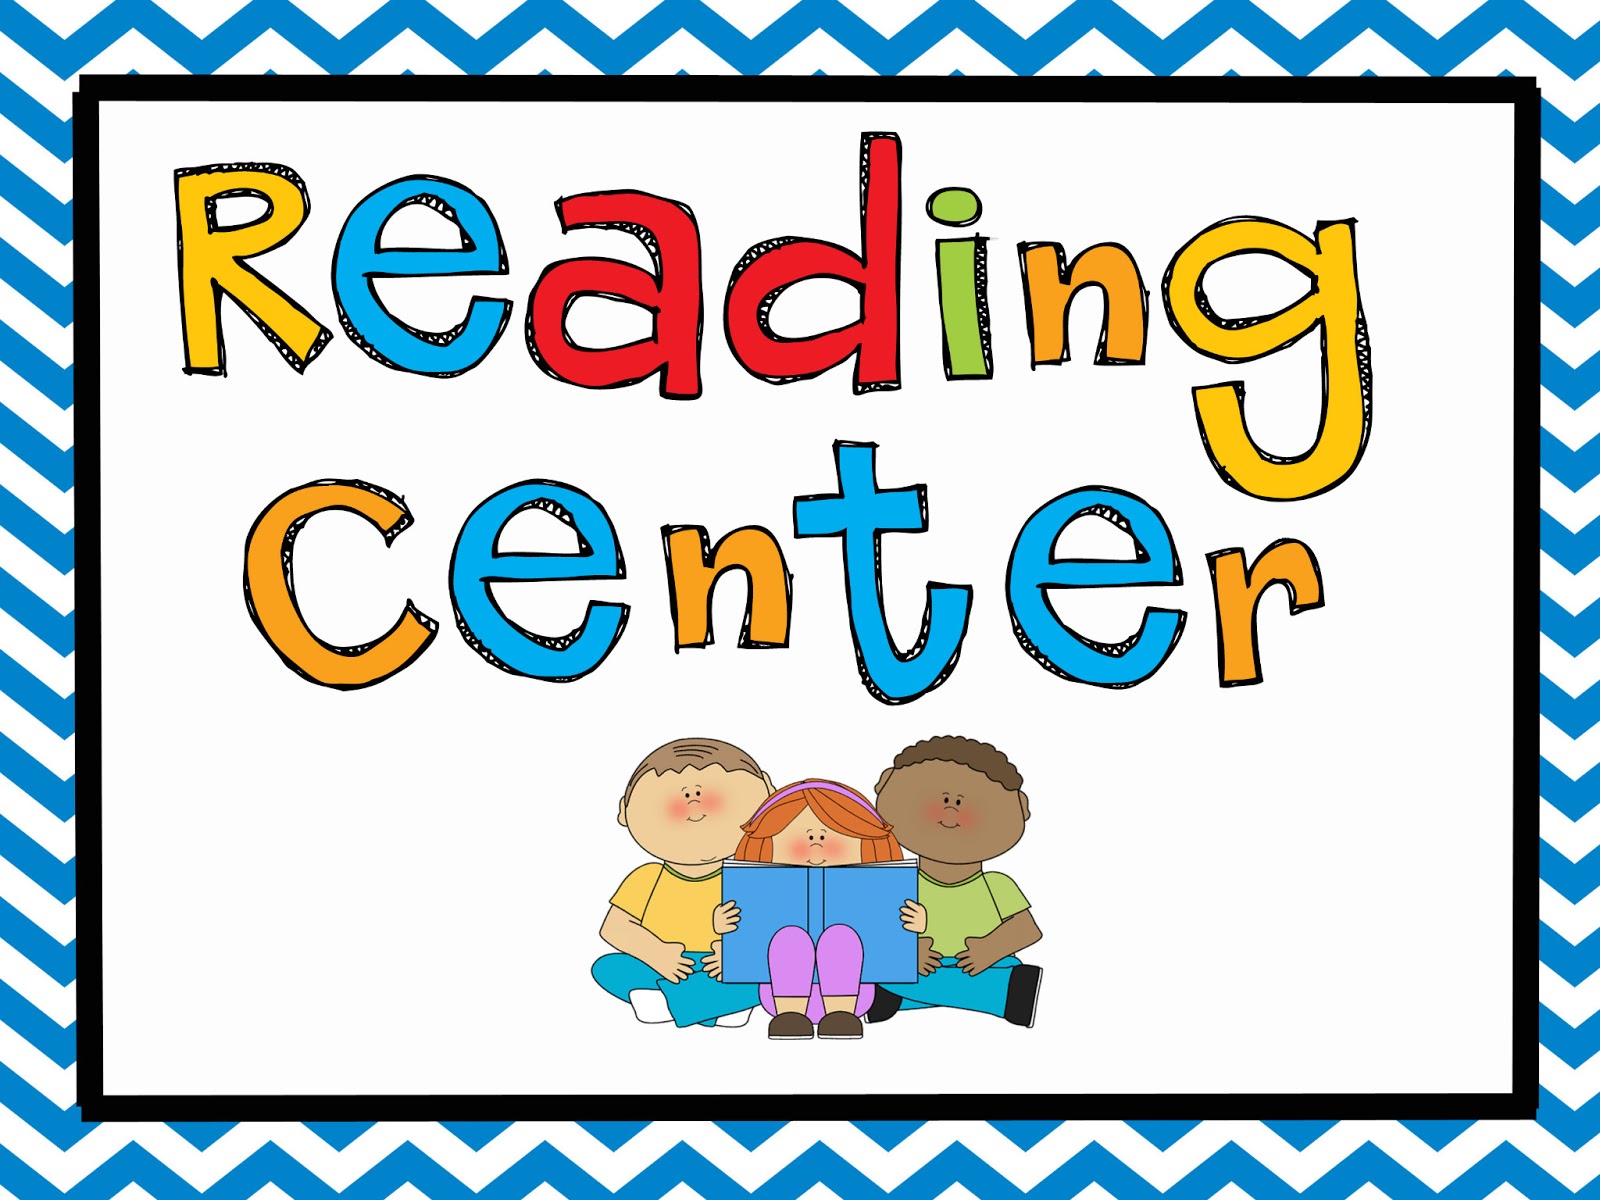 learning centers clip art